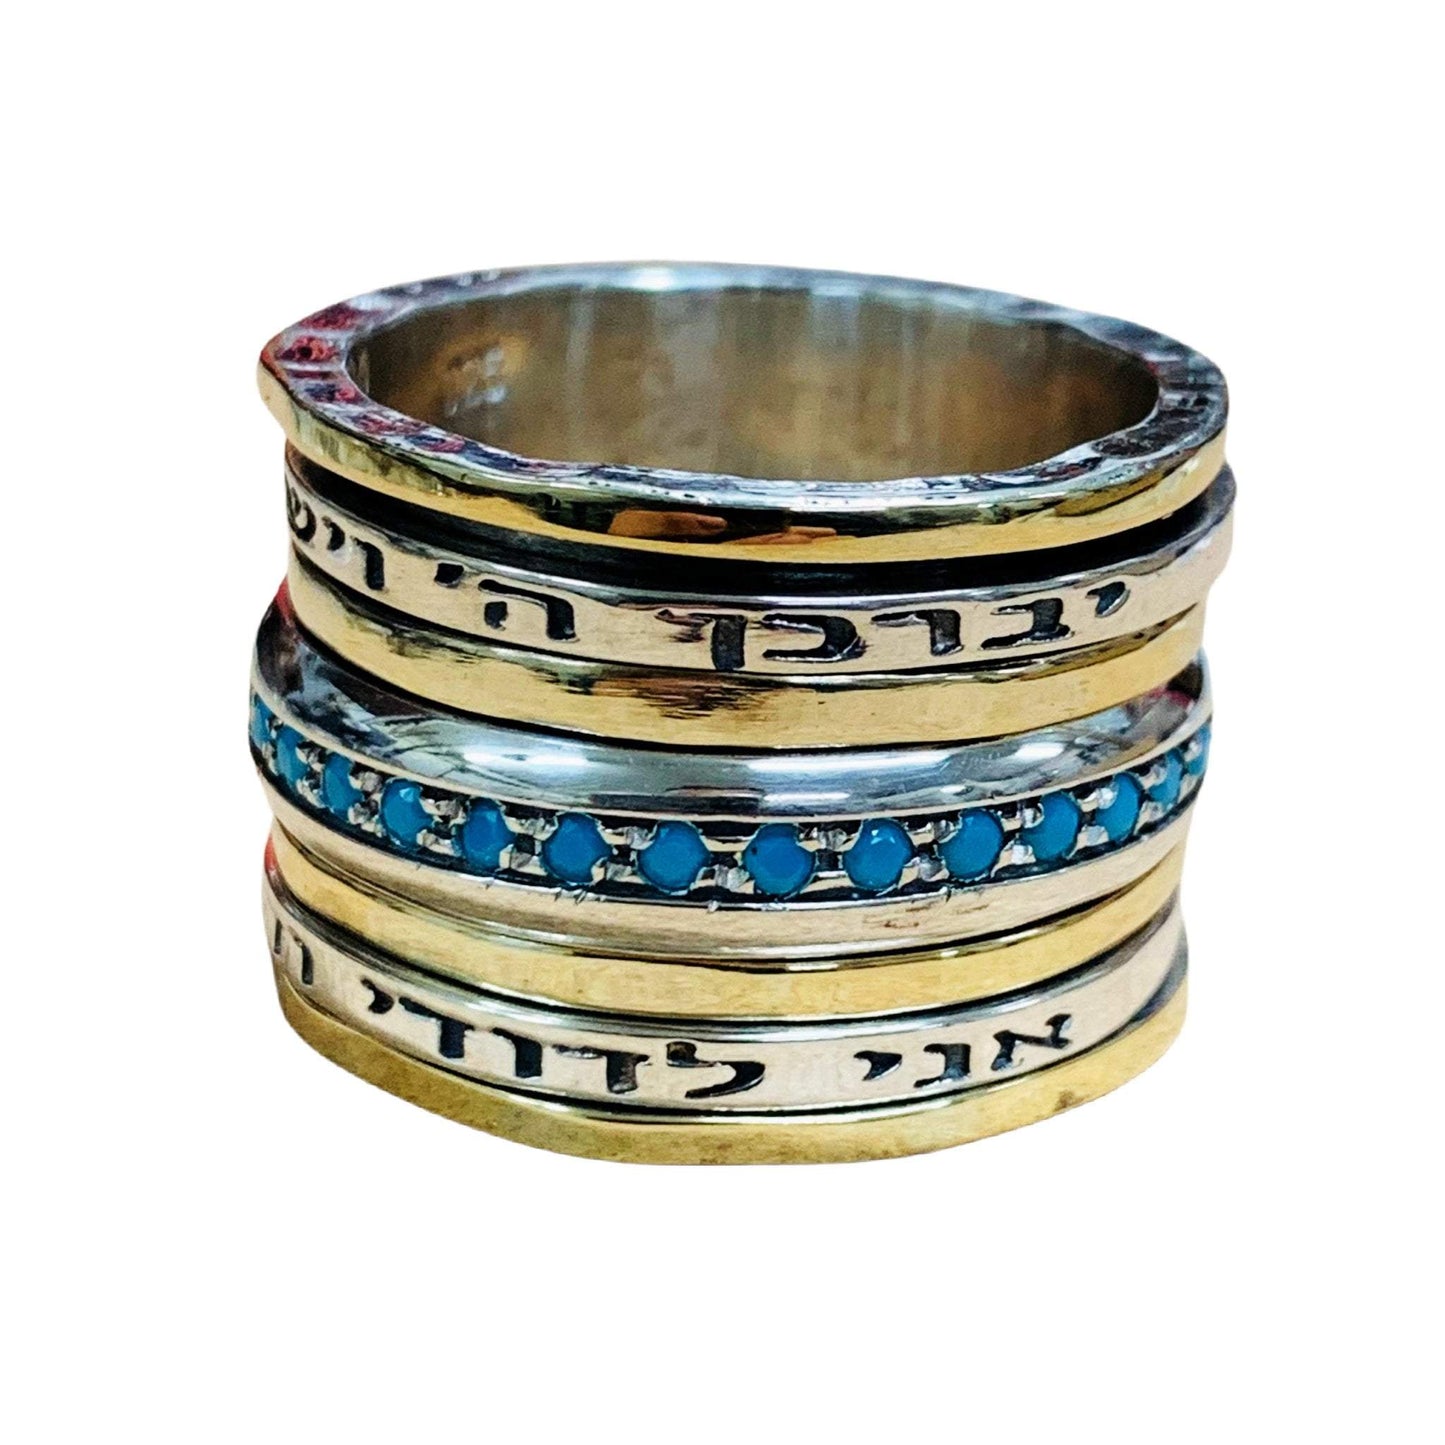 Bluenoemi Jewelry Personalized Rings Spinner ring for woman . Hebrew Fidget Meditation ring. Love & wishes verses rings. Turquoises, opals, cz zircons